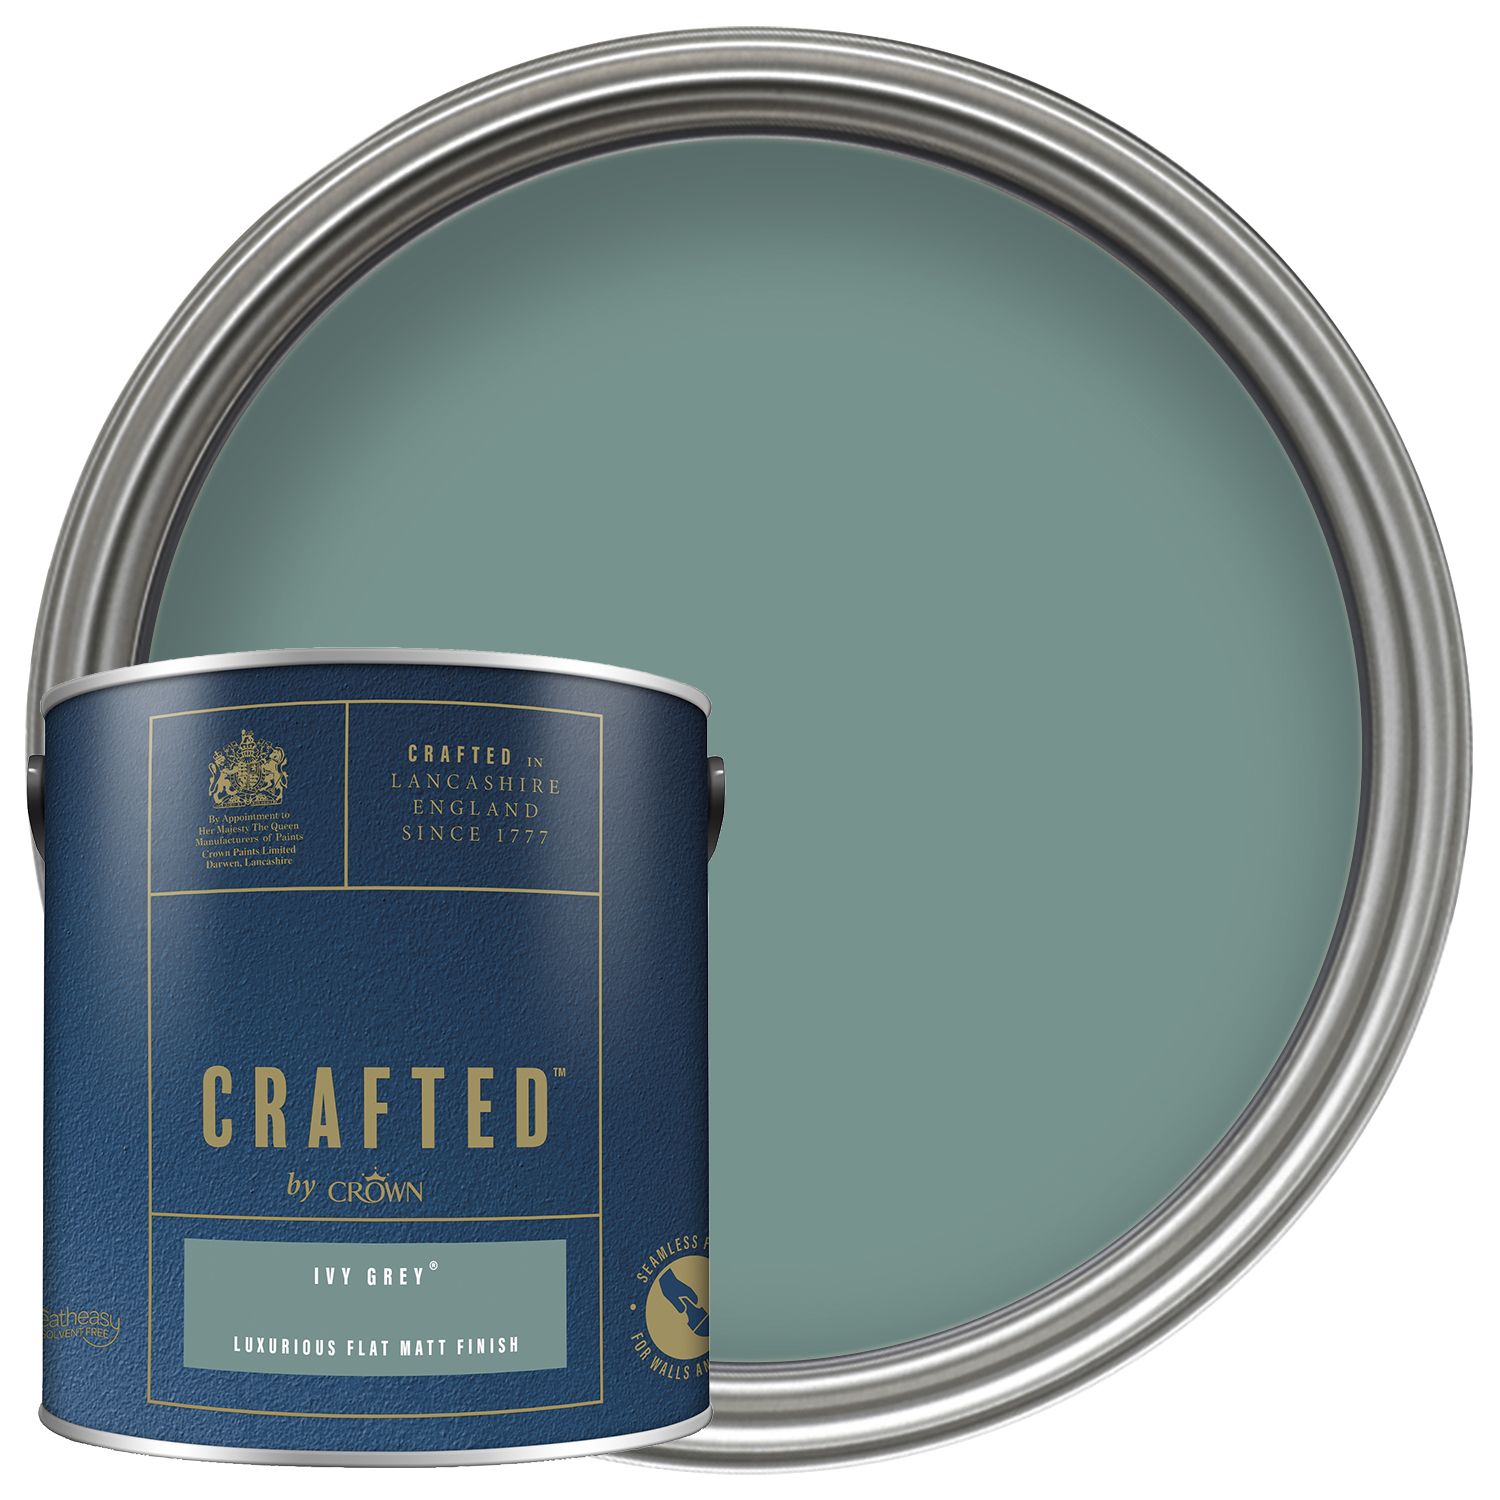 Image of CRAFTED™ by Crown Flat Matt Emulsion Interior Paint - Ivy Grey™ - 2.5L